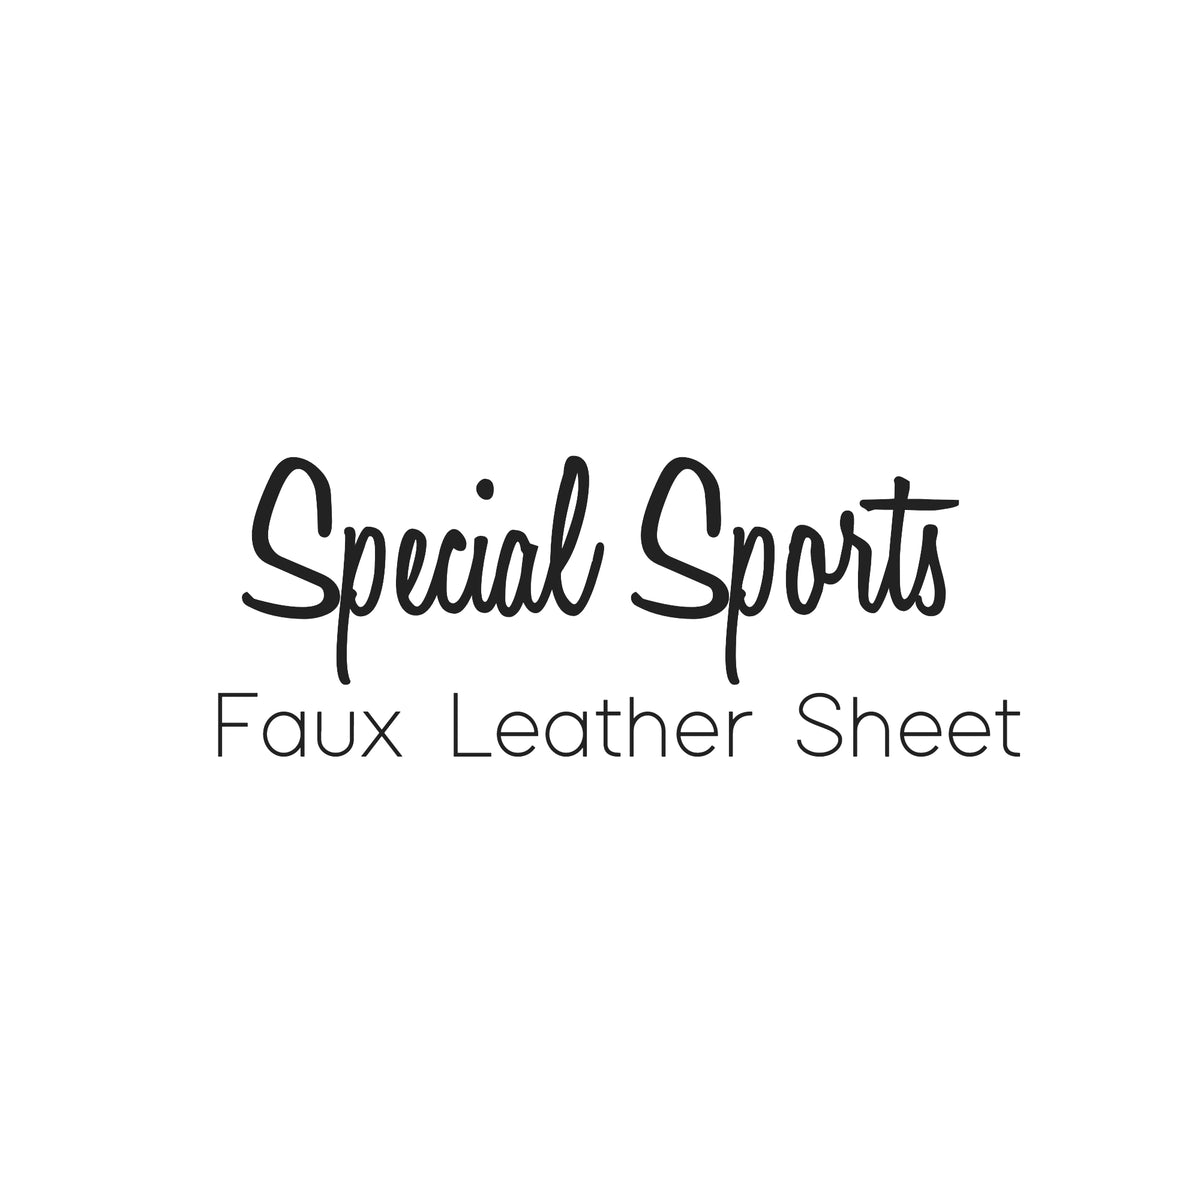 Basketball Pattern Faux Leather Sheet/printed Faux Leather for 